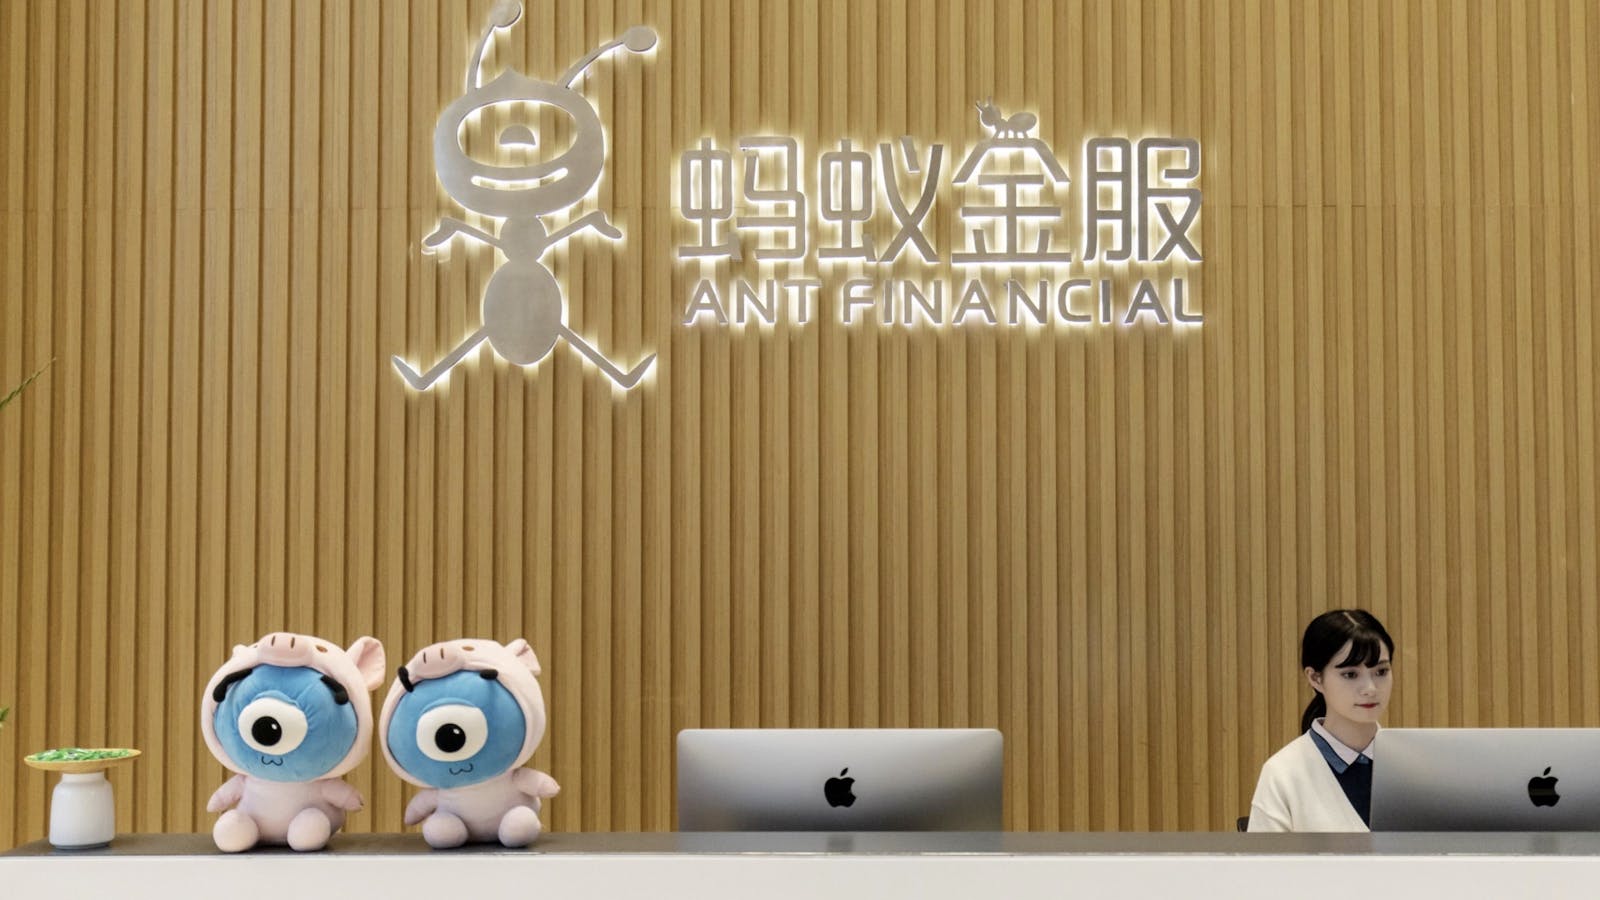 Ant Financial's headquarters in Hangzhou, China, last October. Photo by Bloomberg